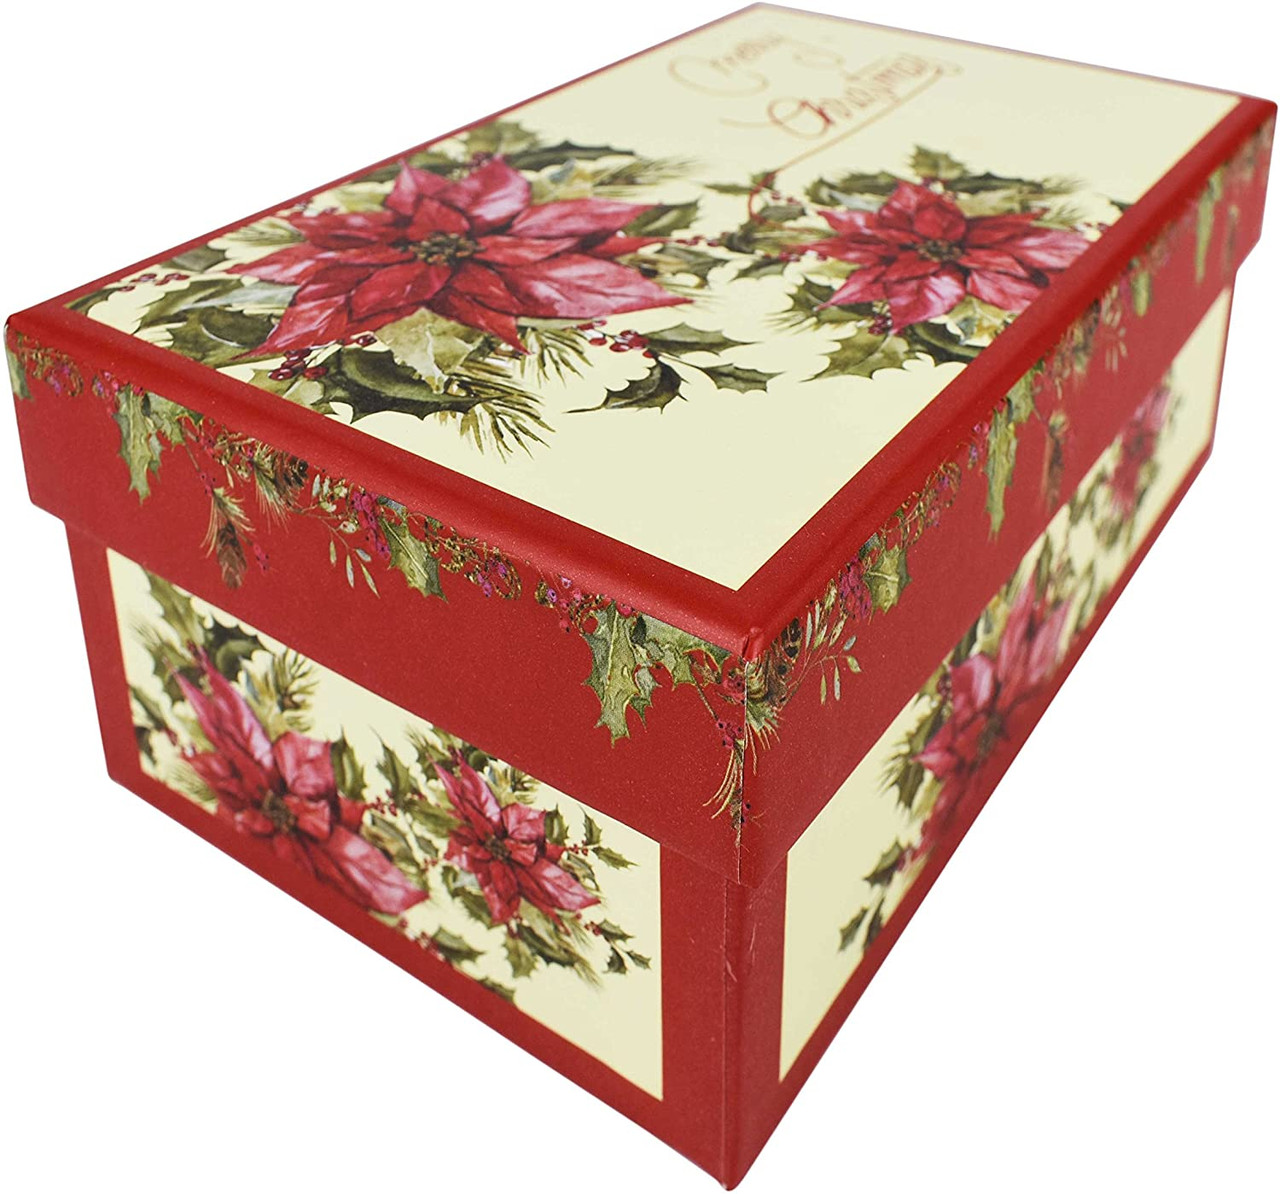 ALEF Elegant Decorative Holiday Themed Nesting Gift Boxes - 7x 3x 4.5 - Nesting  Boxes Beautifully Themed and Decorated - Perfect for Gifts or Simple  Decoration Around The House! - DIY Tool Supply